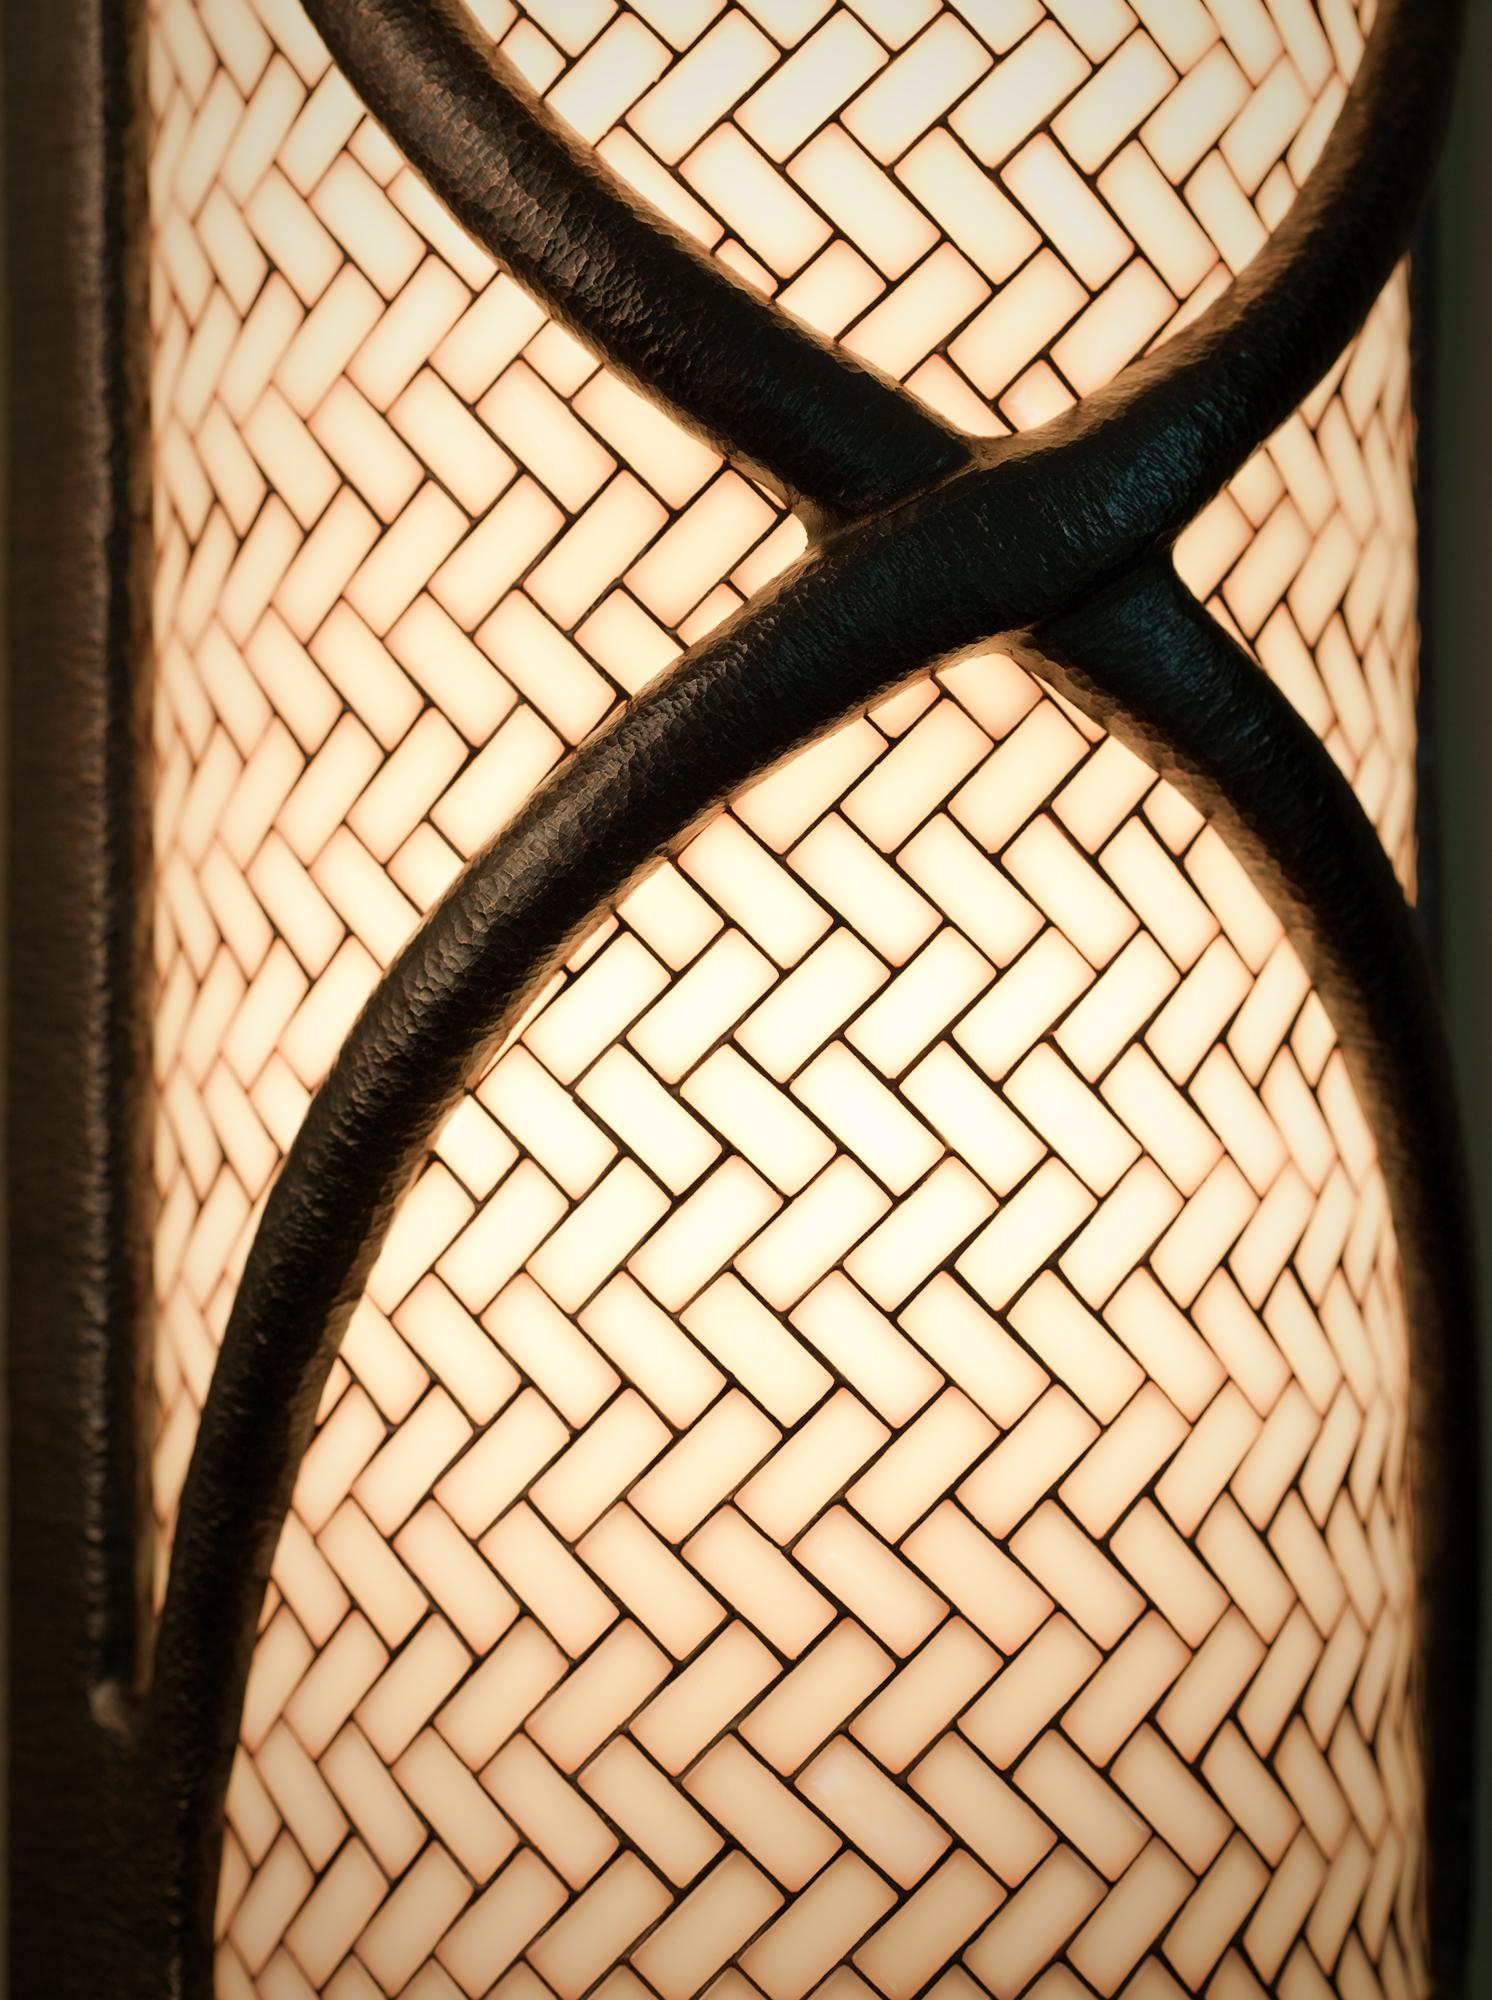 We believe that fine lighting fixtures should be timeless in style and in materials.
By using glass and bronze we can ensure that our fixtures become heirlooms of our next generation. The Tiled Ribbon Sconce is crafted from our kiln cooked tiles